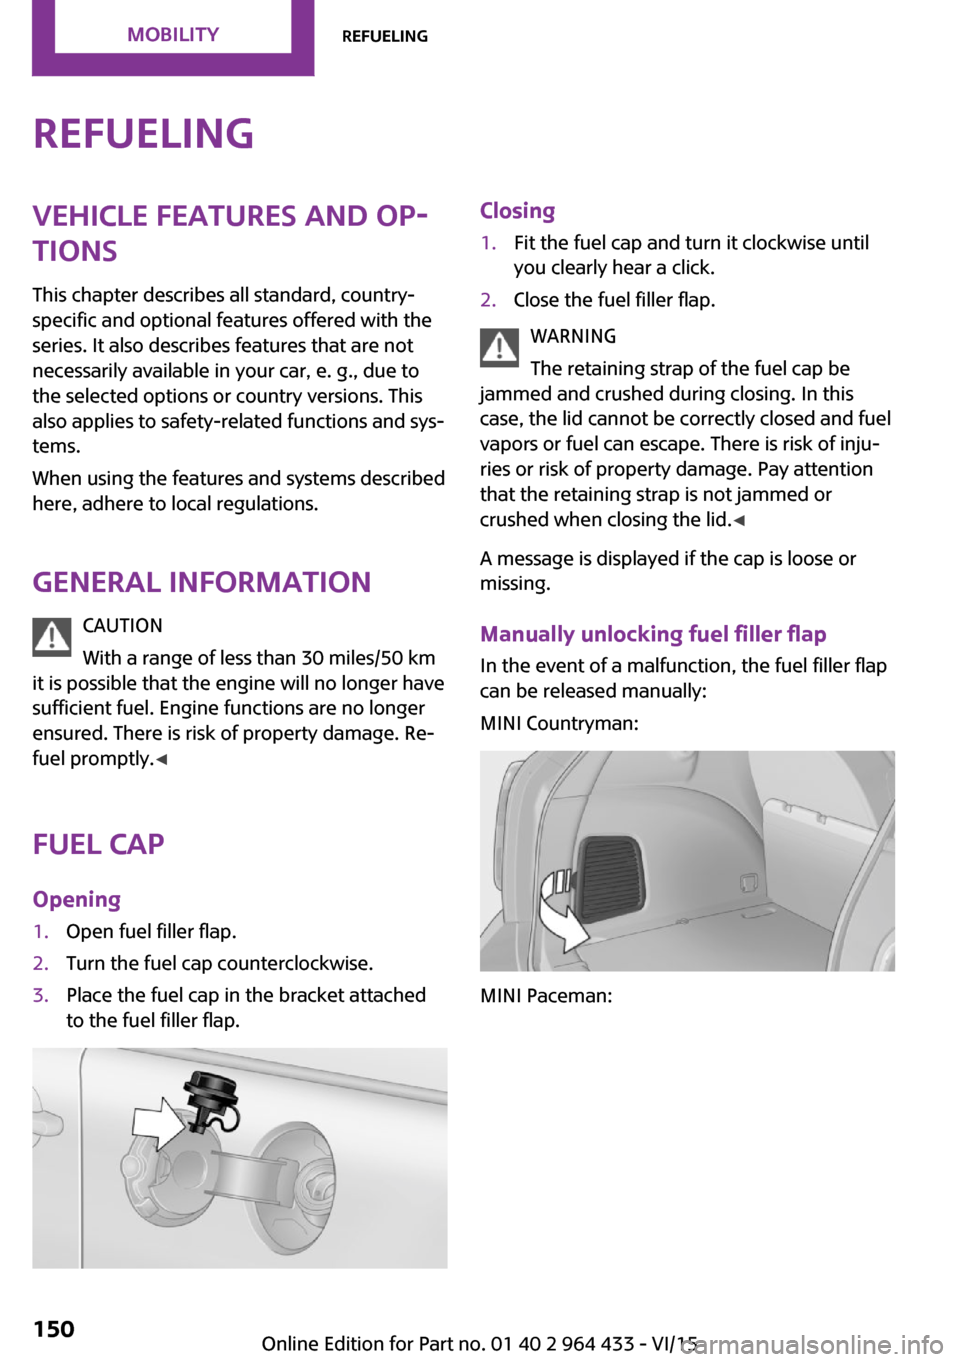 MINI Paceman 2016   (Mini Connected) Service Manual RefuelingVehicle features and op‐
tions
This chapter describes all standard, country-
specific and optional features offered with the
series. It also describes features that are not necessarily avai